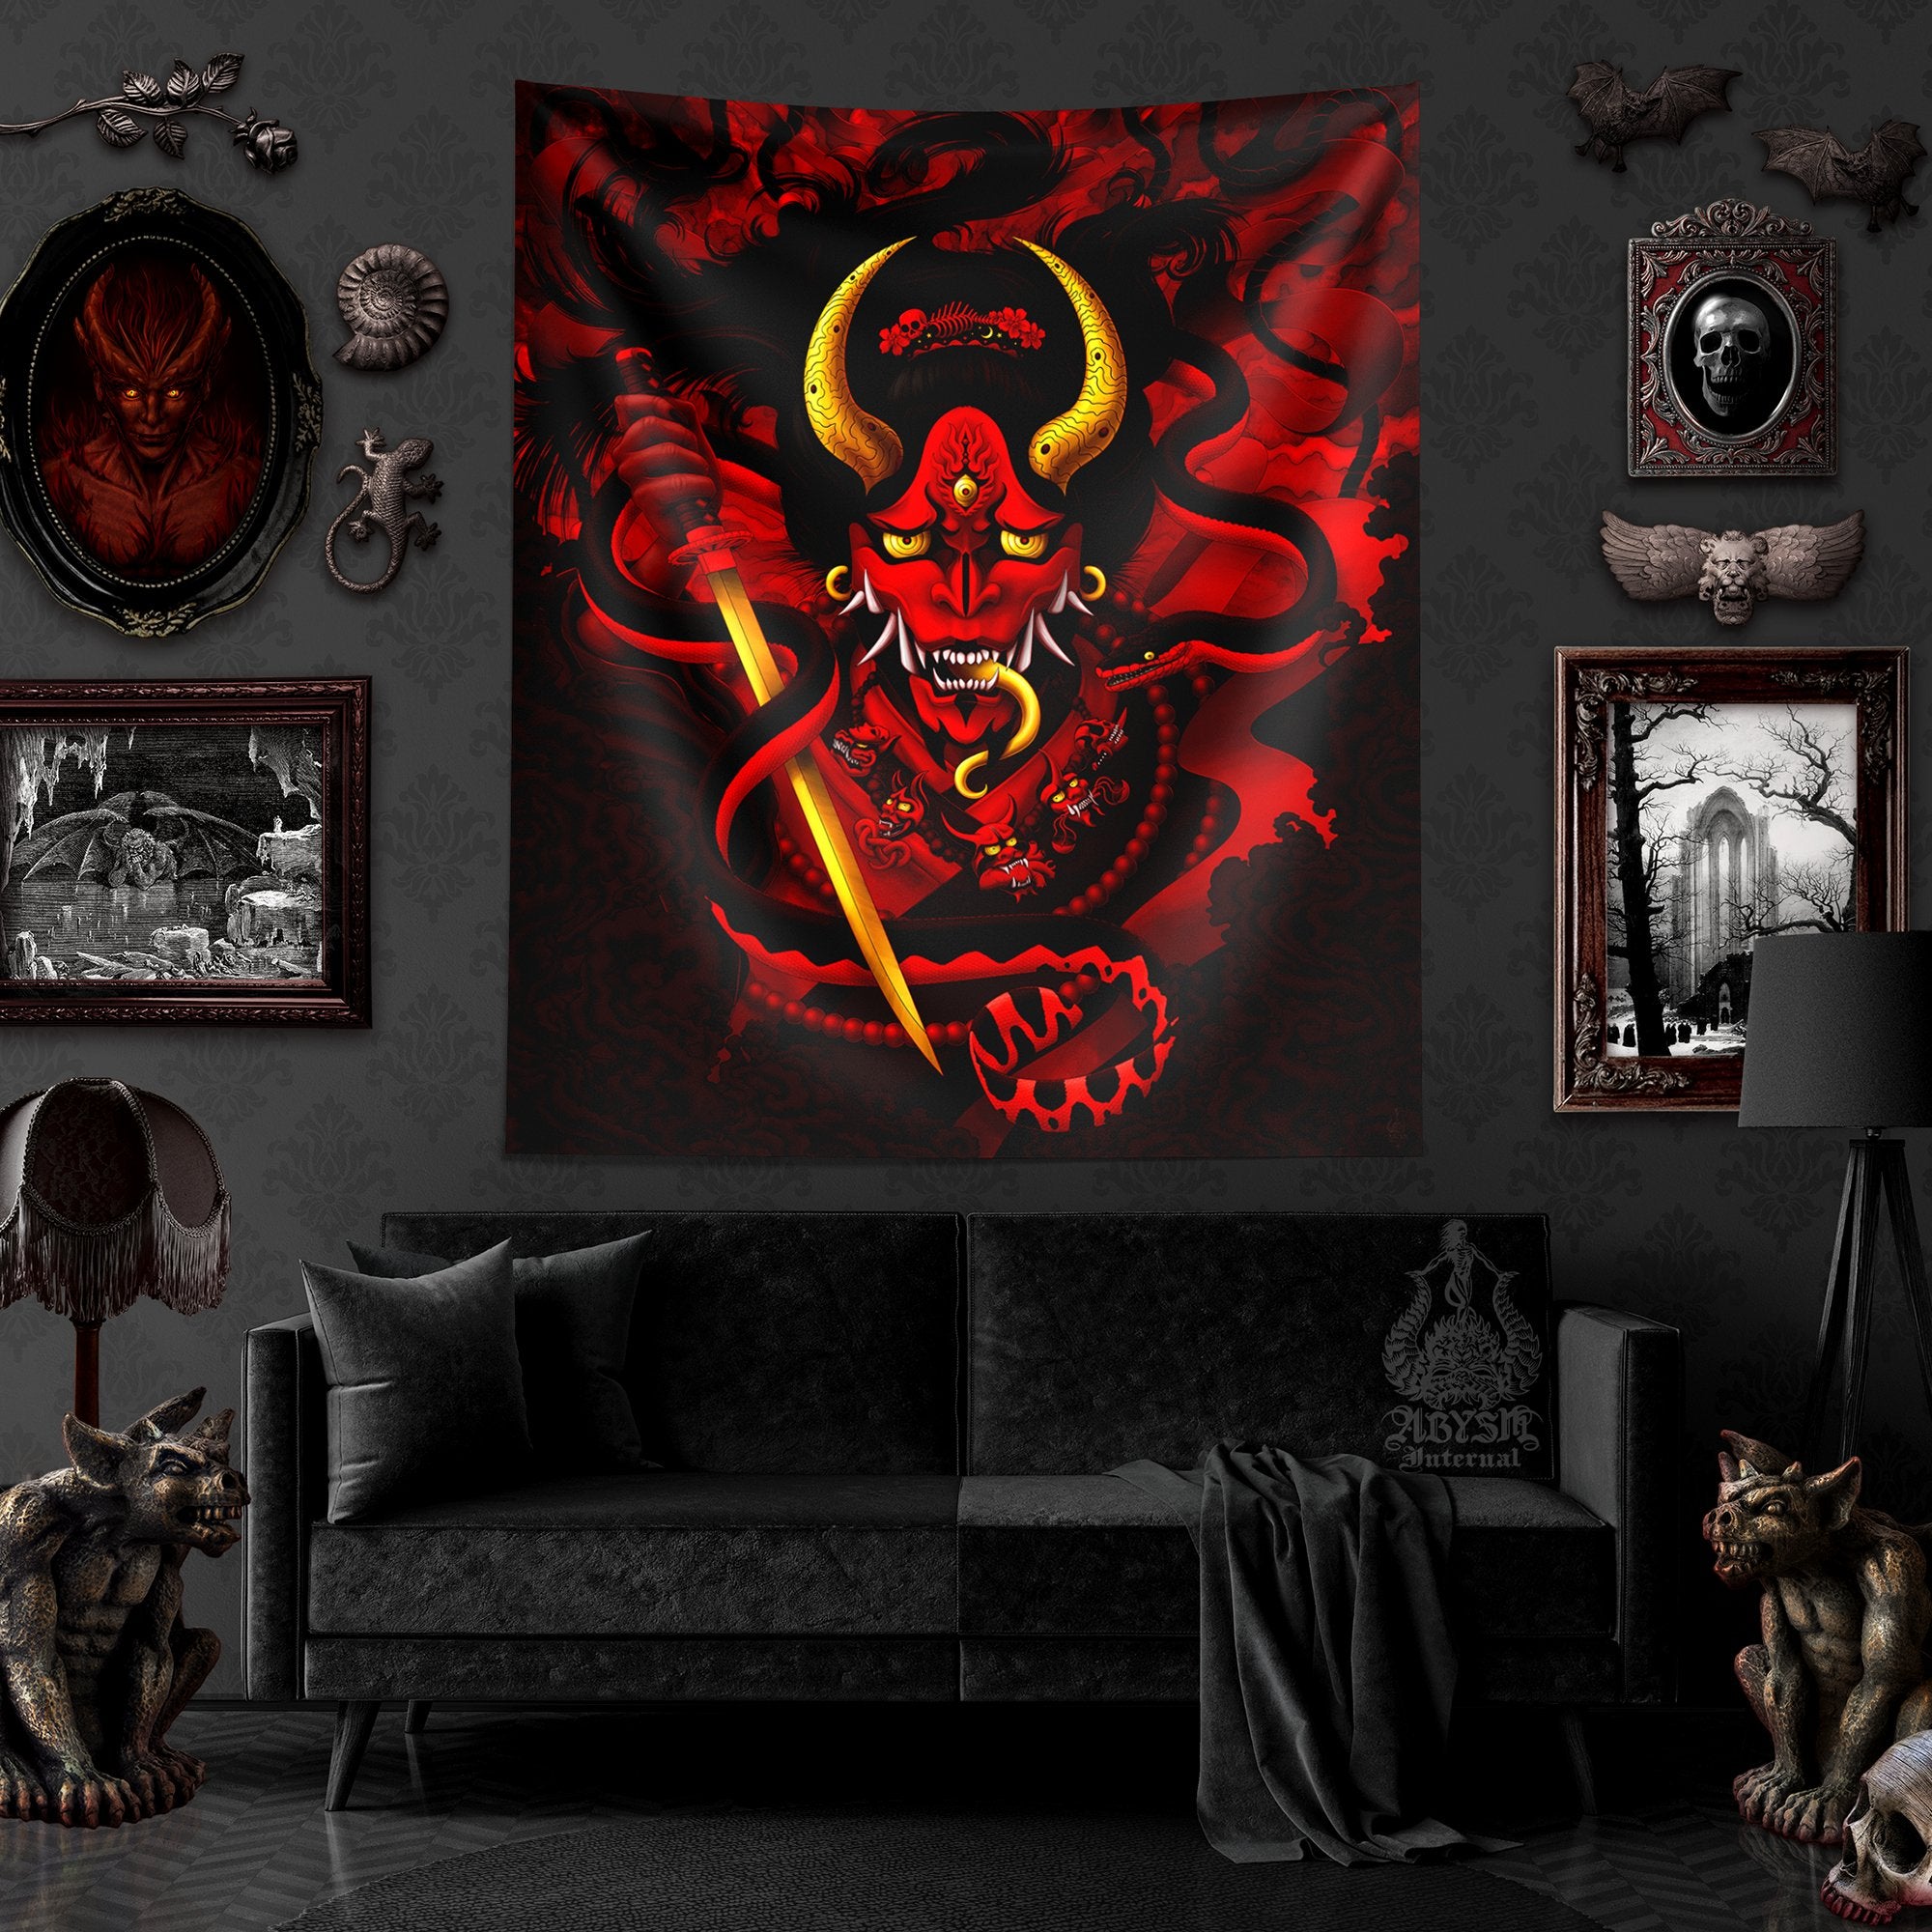 Bloody Goth Hannya Tapestry, Gothic Japanese Demon and Snake Wall Hanging, Anime, Manga and Gamer Room Decor, Vertical Art Print - Red Black - Abysm Internal